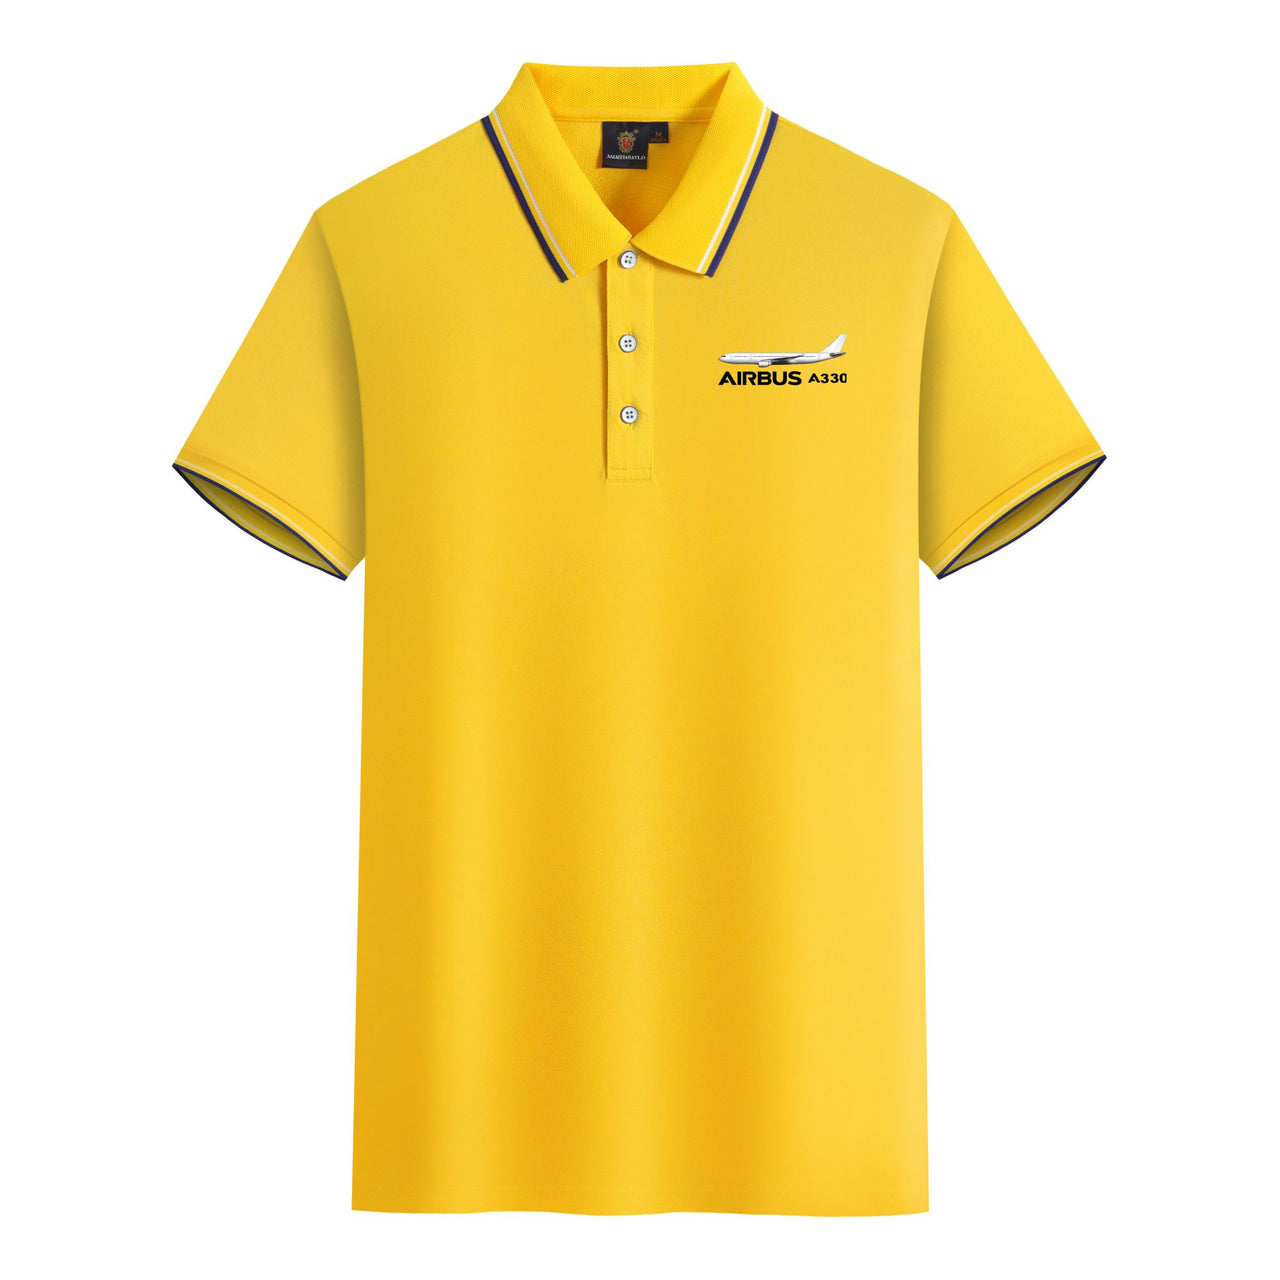 The Airbus A330 Designed Stylish Polo T-Shirts